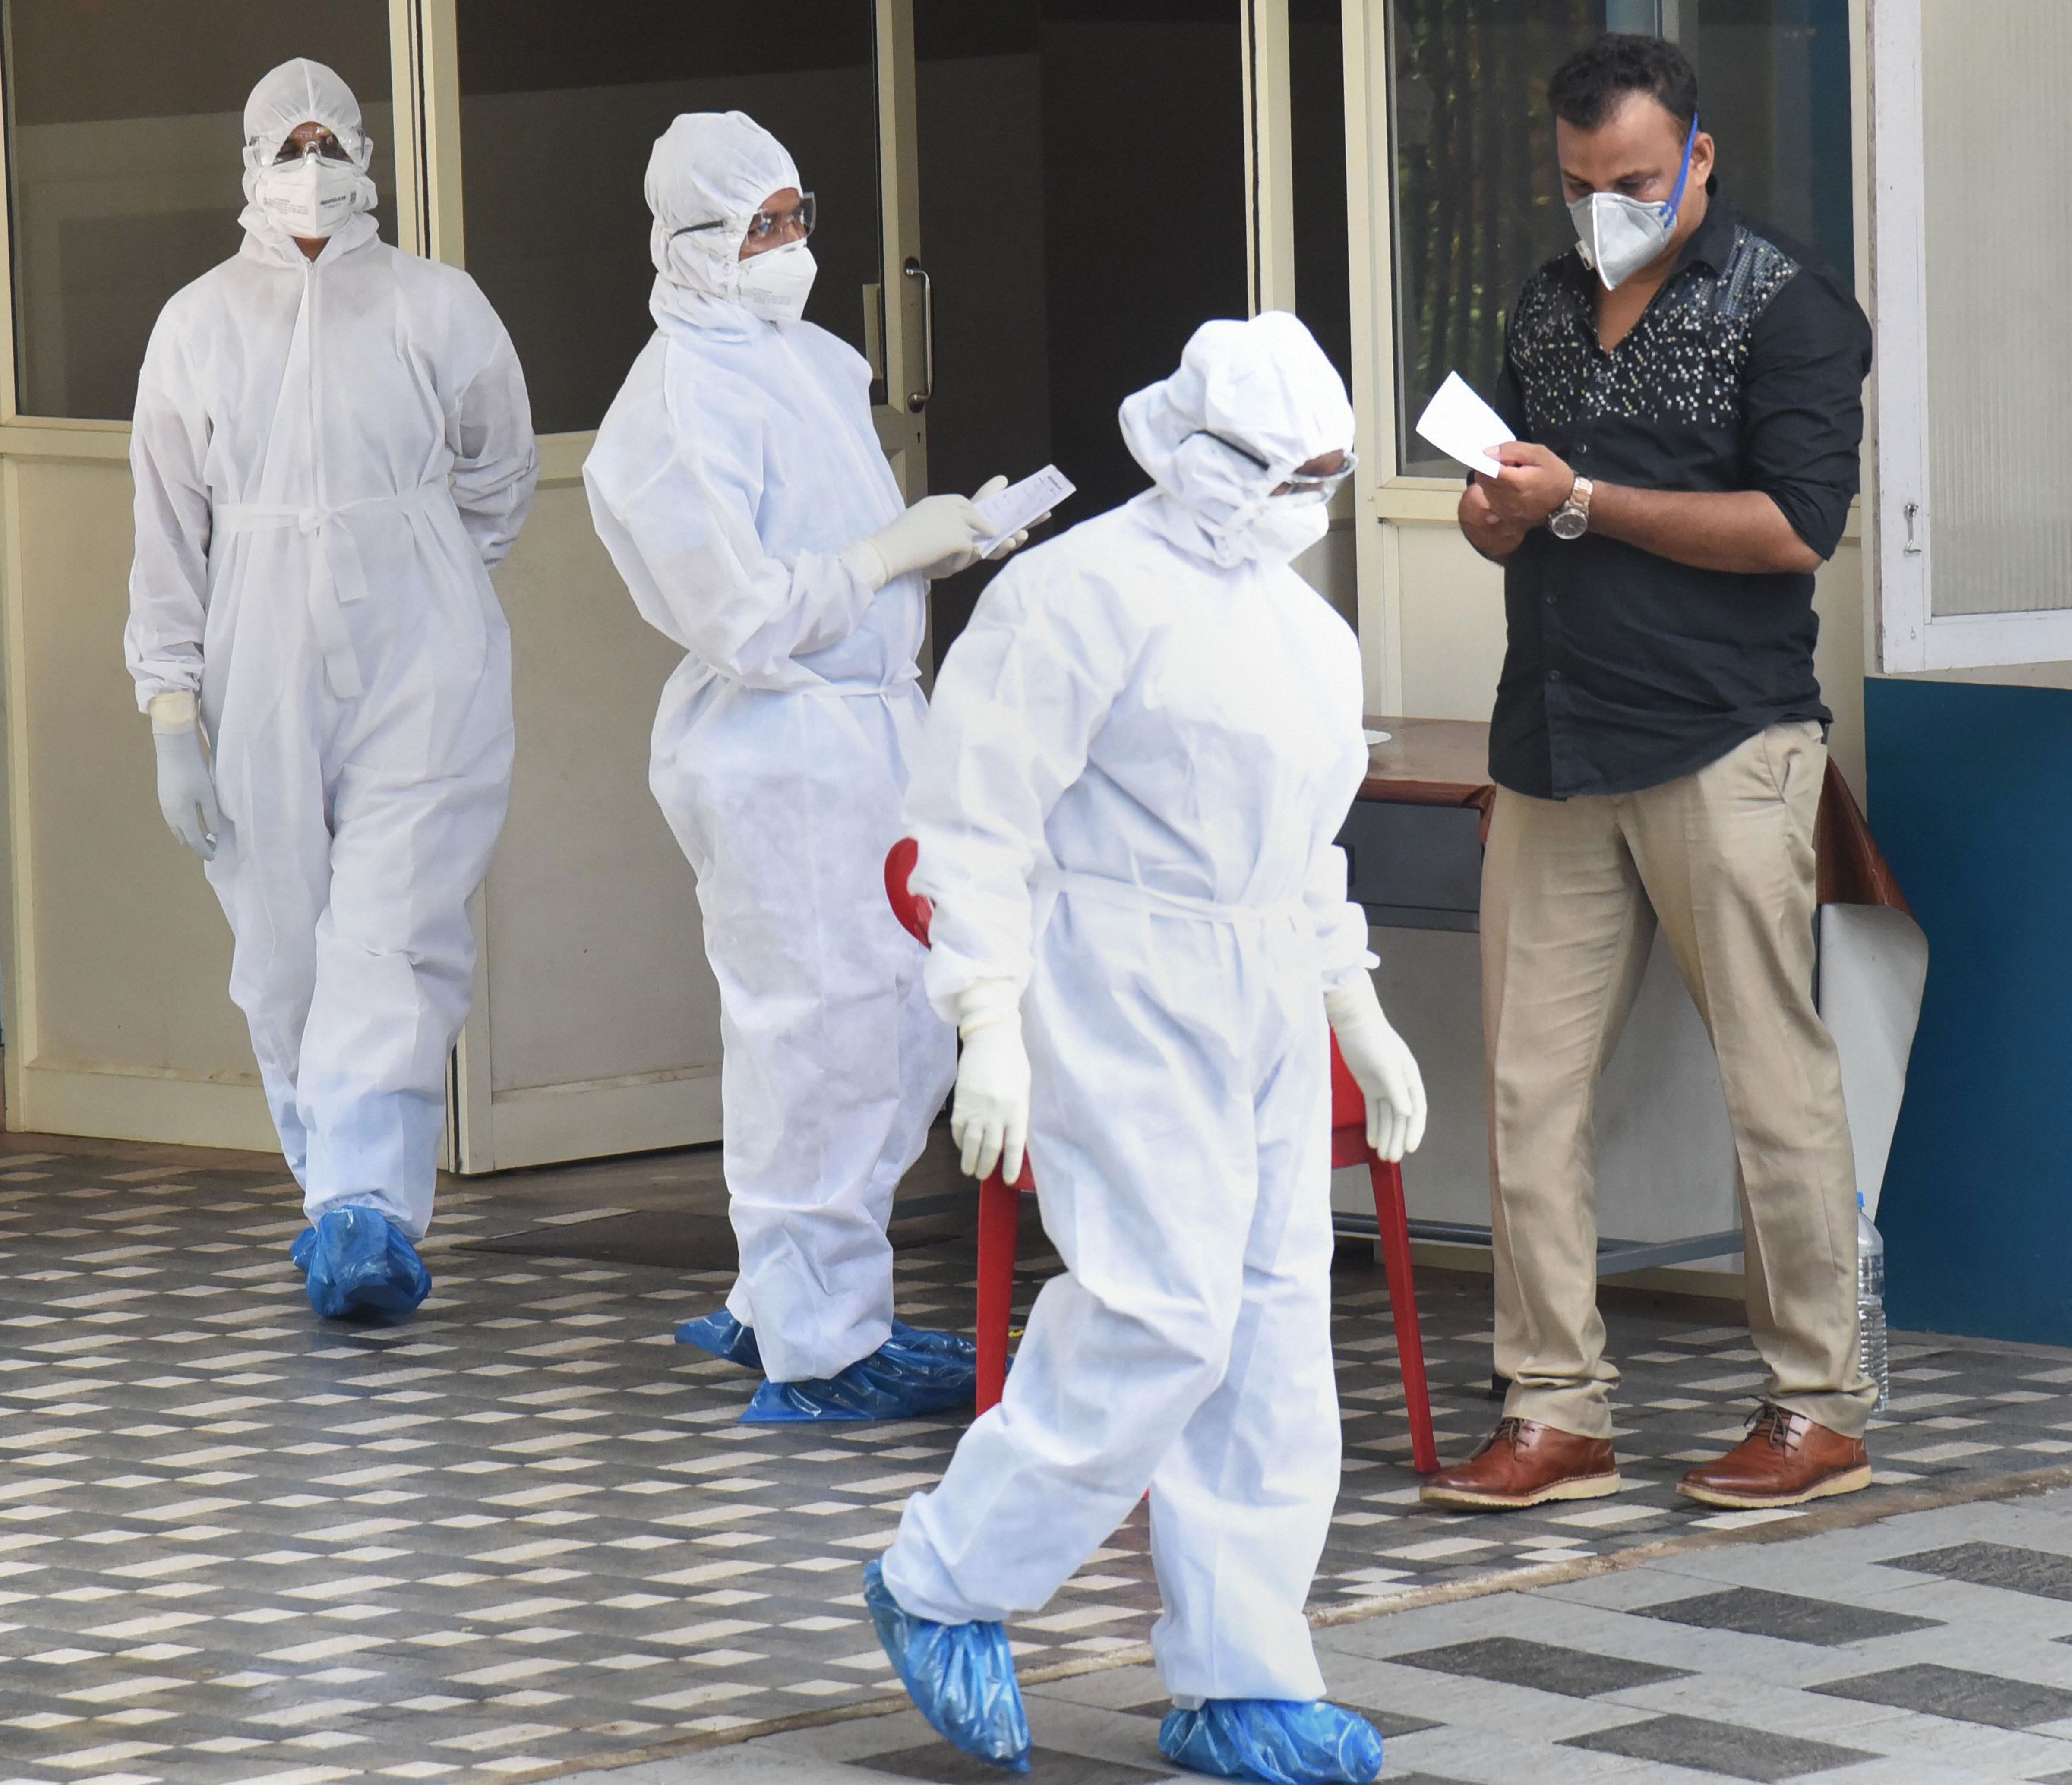 Medical staff members wear masks and protective suits to mitigate the spread of coronavirus. (PTI Photo)